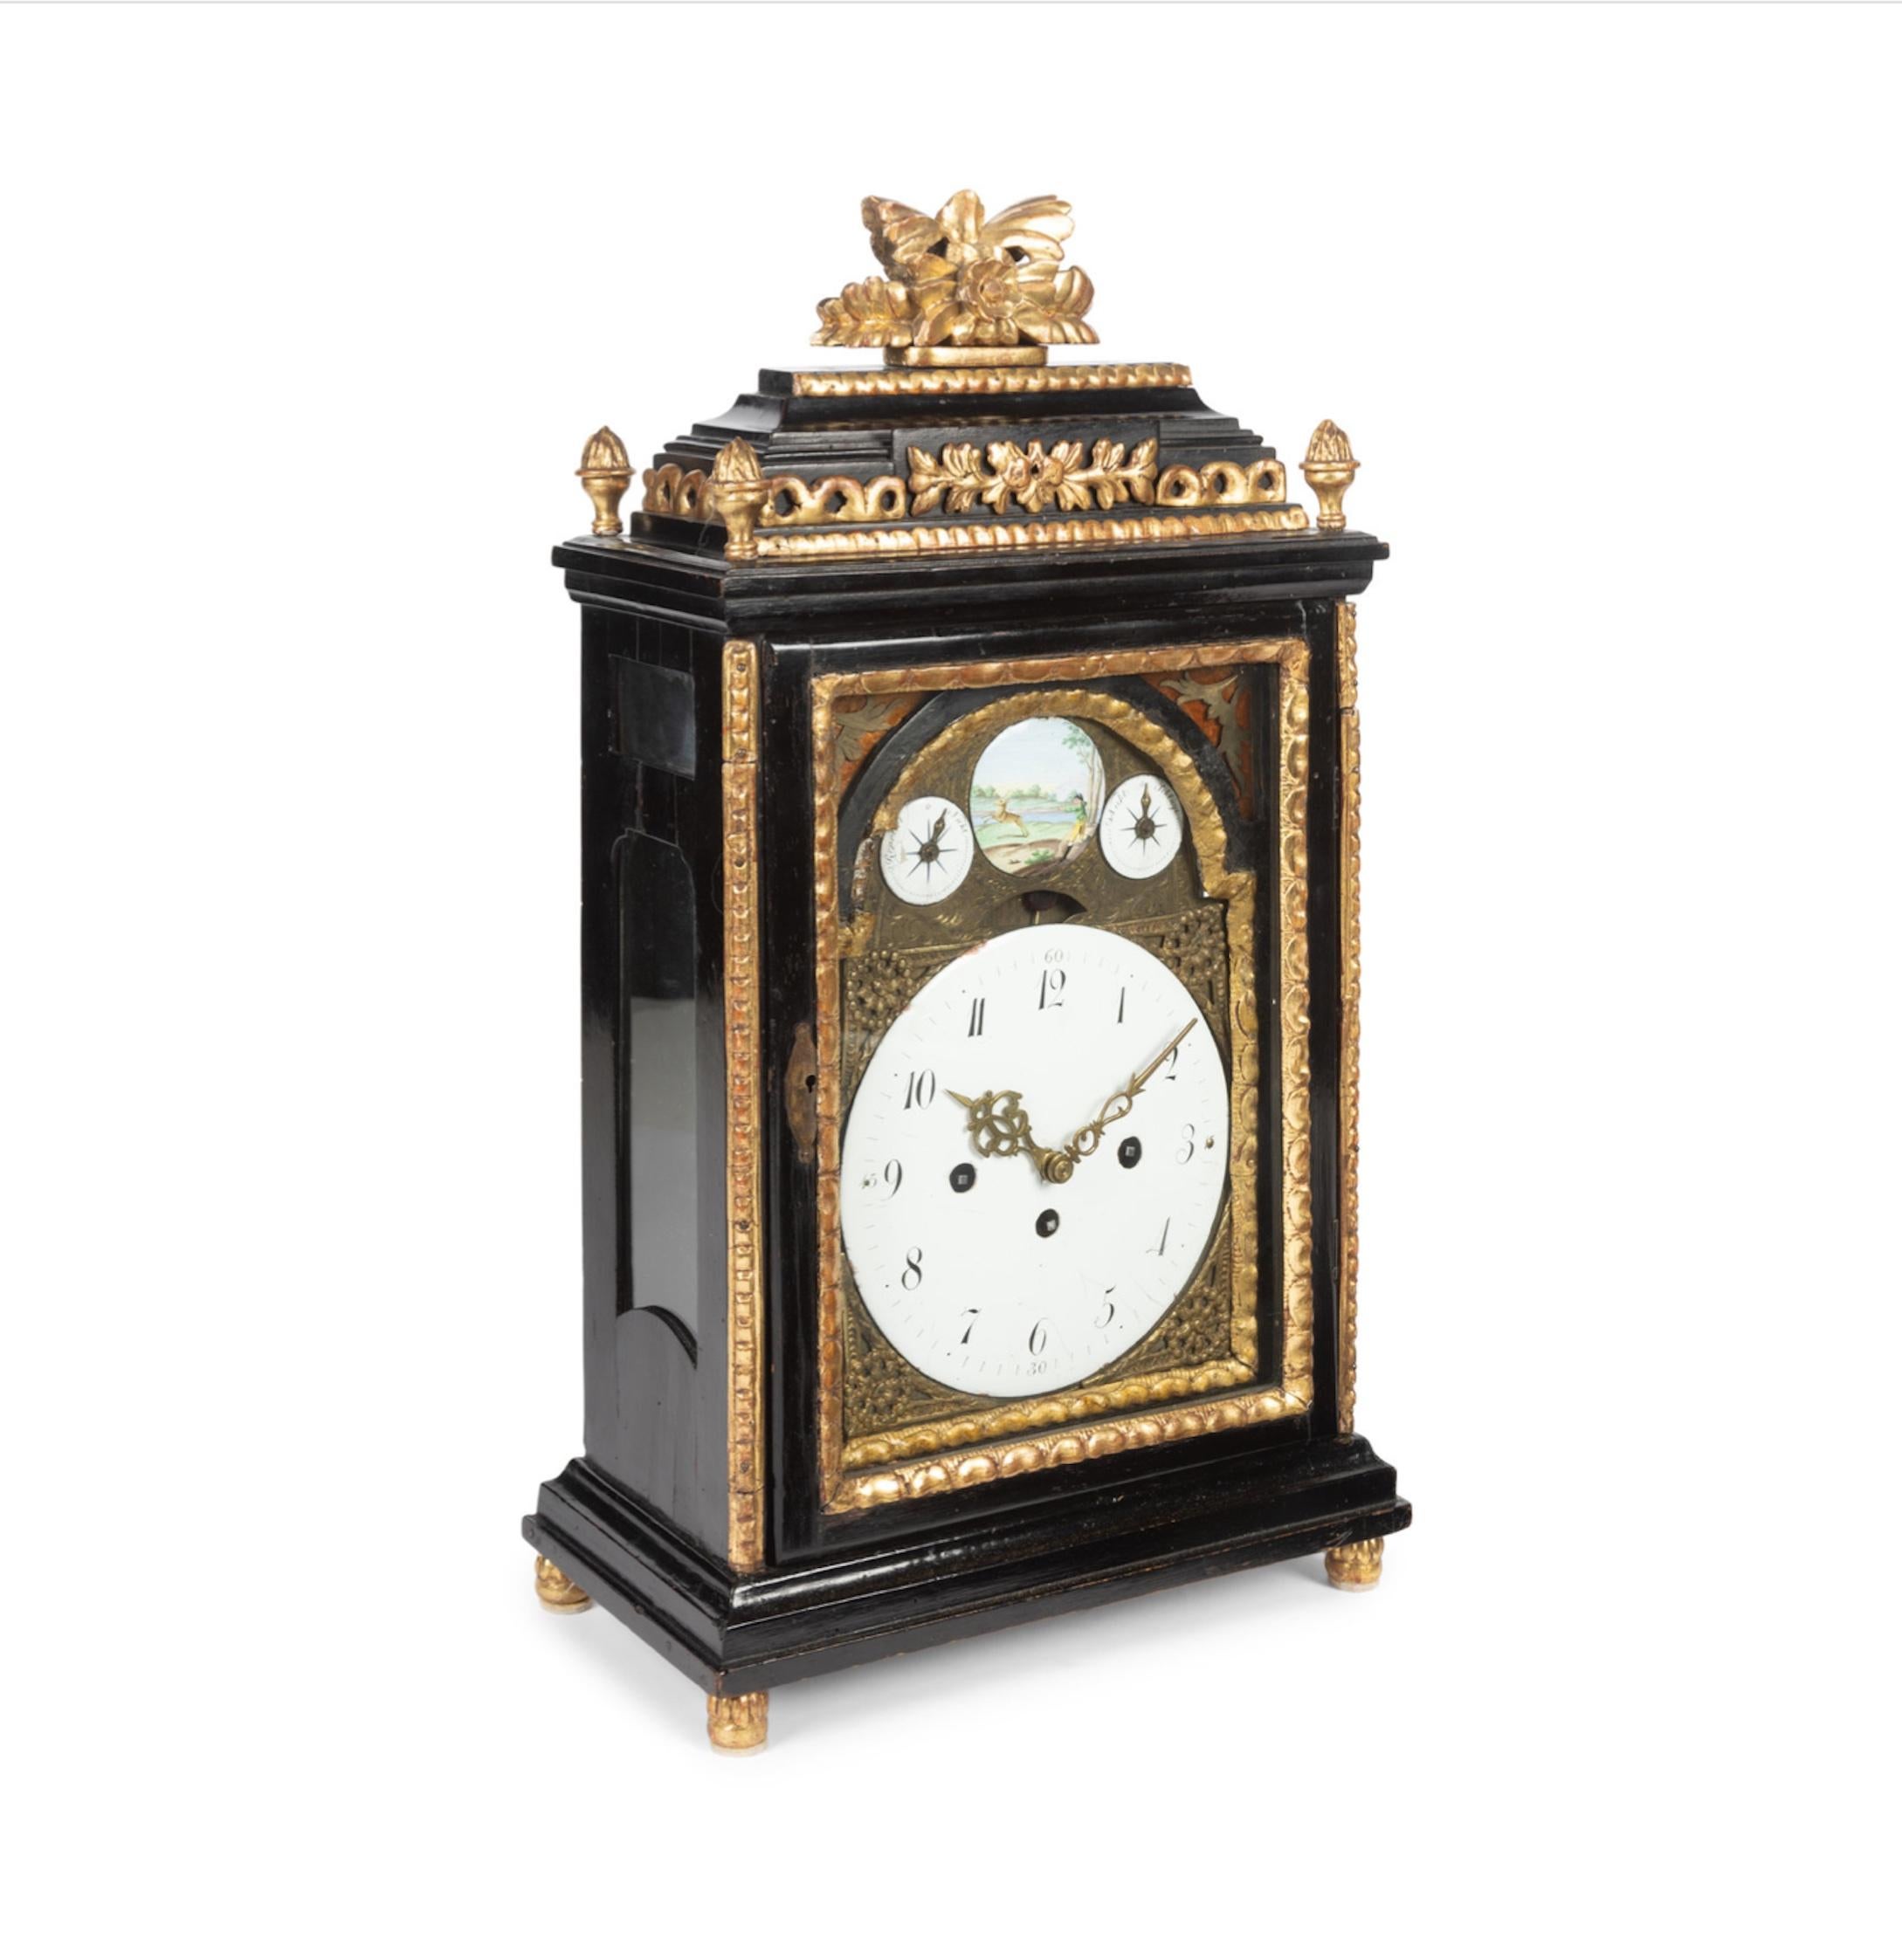 An Austrian Ebonized and Parcel Gilt Bracket Clock 
Late 18th/Early 19th Century
Height 21 x width 11 x depth 5 1/2 inches.
Property from the Collection of Marguerite Hark, Chicago, Illinois and Surfside, Florida
